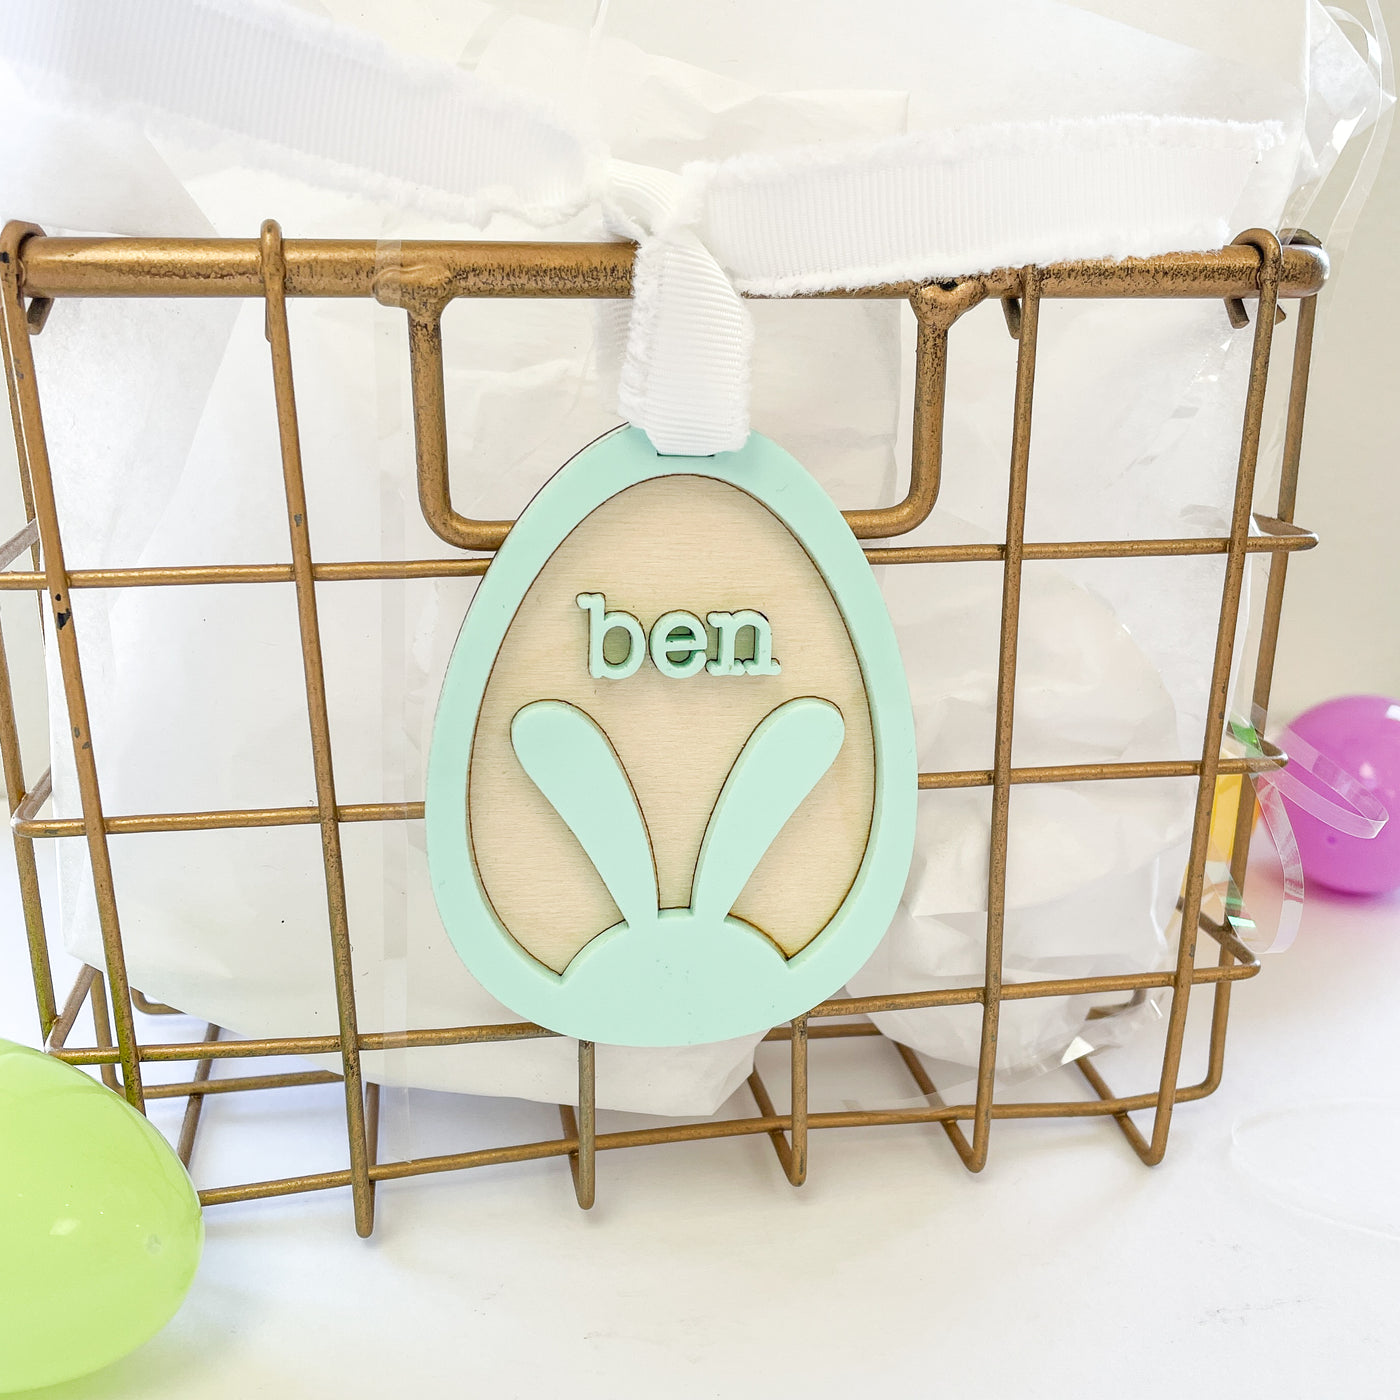 Personalized Easter Basket Tags, Egg Shape